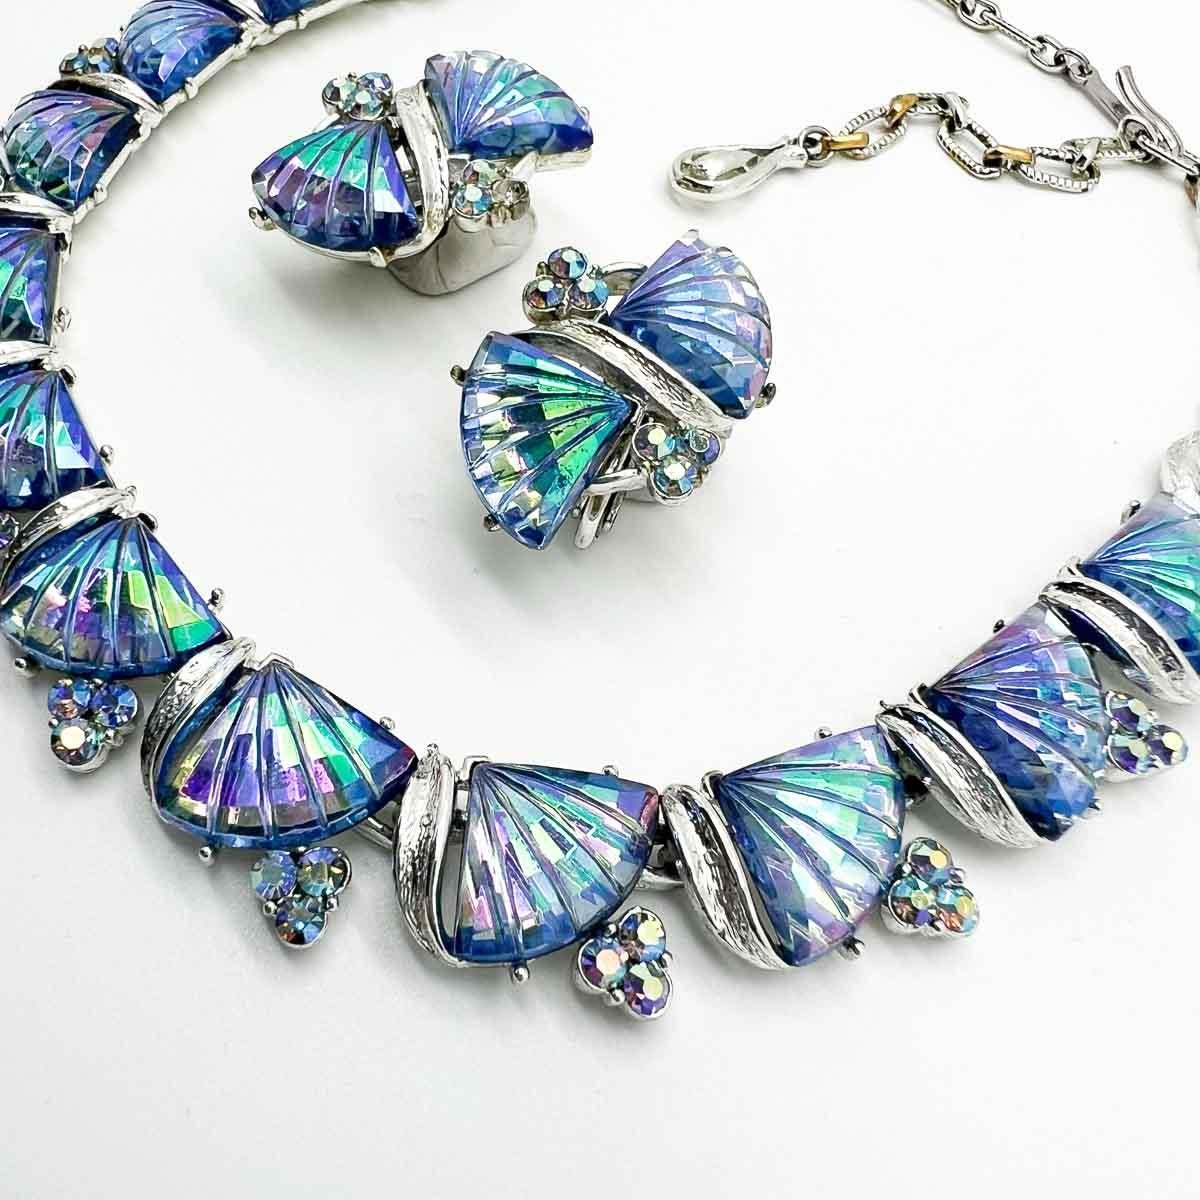 A Vintage Jewelcraft Fan Necklace and earrings creating the most mesmerising set of mid-century jewels. The aurora borealis finish and stylised floral motif stones creating a dreamy current vibe despite their seventy-year life.  Jewelcraft was a